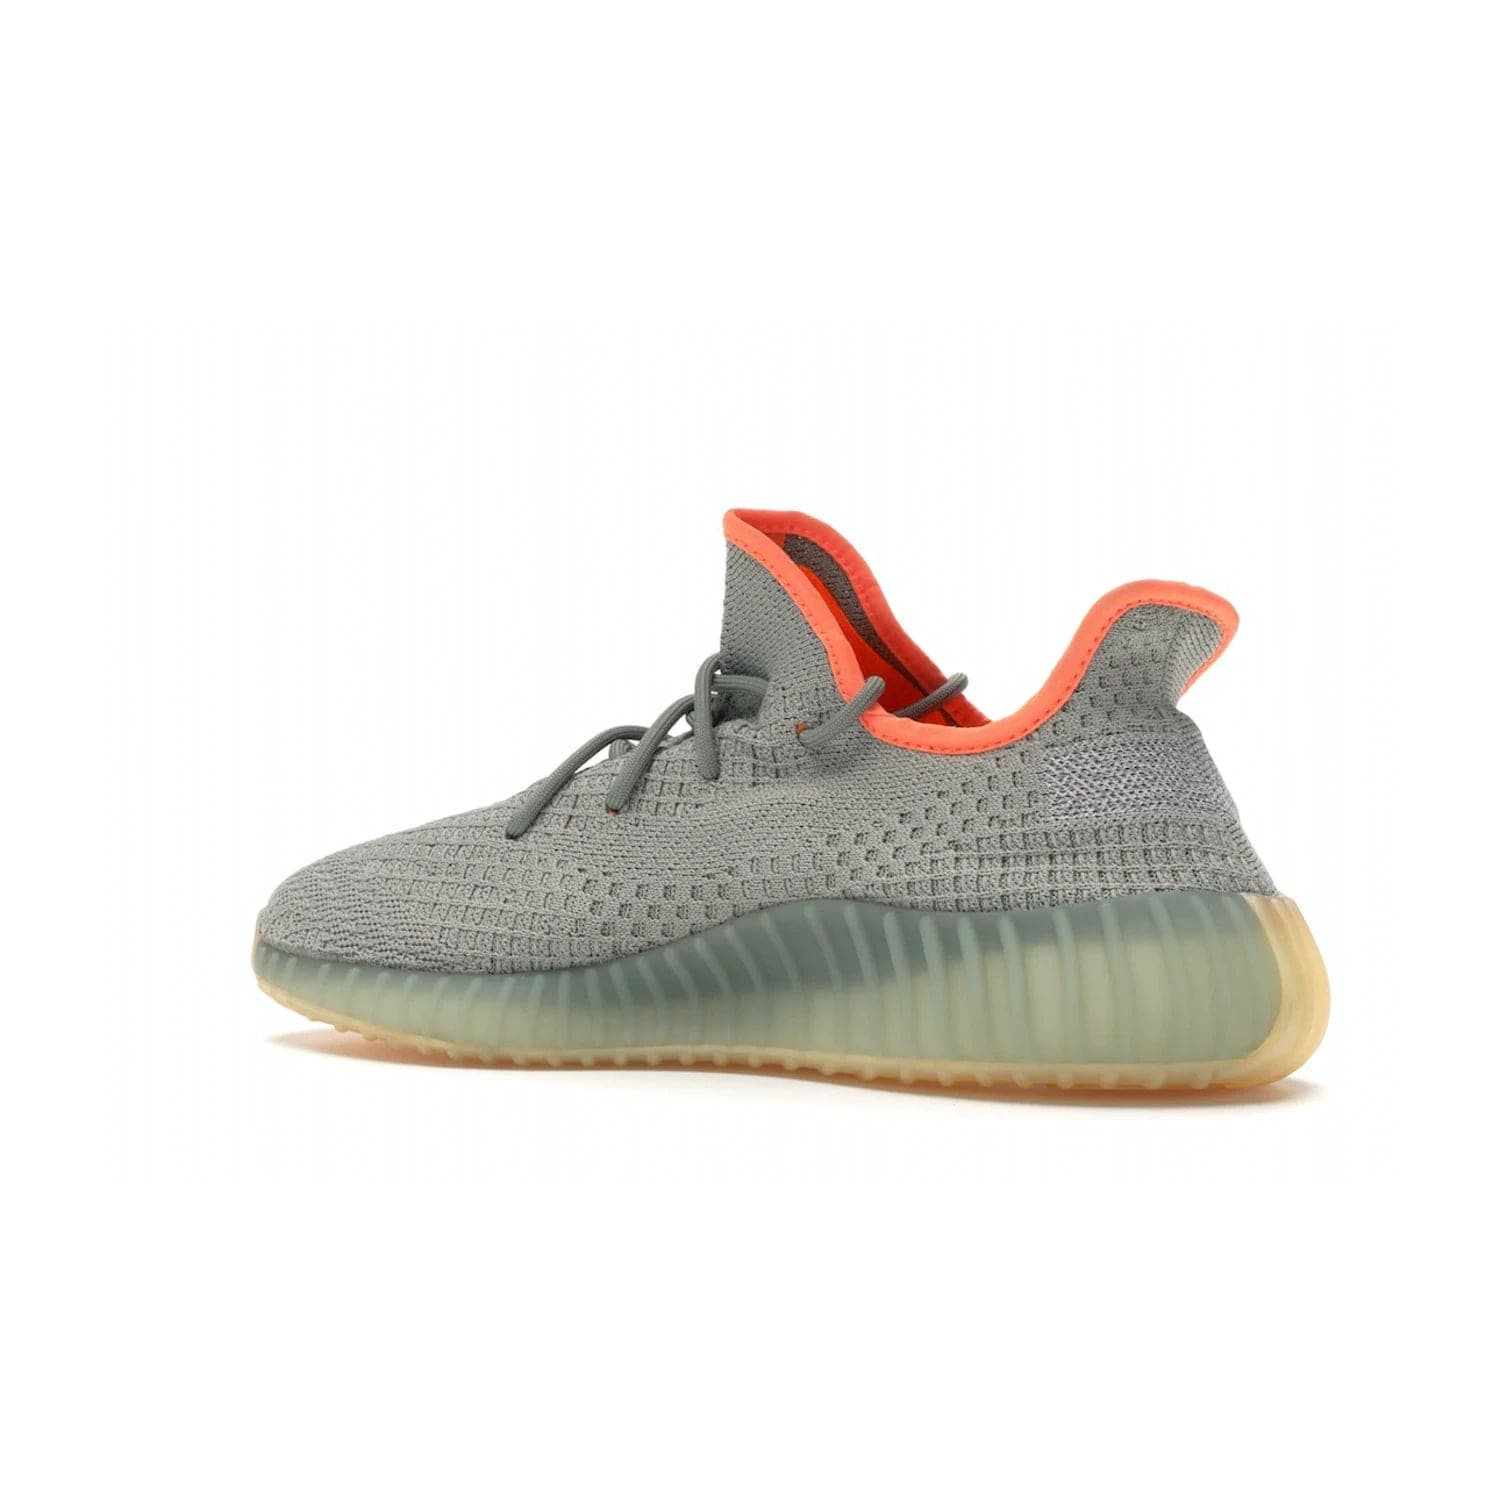 adidas Yeezy Boost 350 V2 Desert Sage - Image 22 - Only at www.BallersClubKickz.com - Upgrade your style with the adidas Yeezy Boost 350 V2 Desert Sage. This 350V2 features a Desert Sage primeknit upper with tonal side stripe, and an orange-highlighted translucent Boost cushioning sole. Stay on-trend in effortless style.